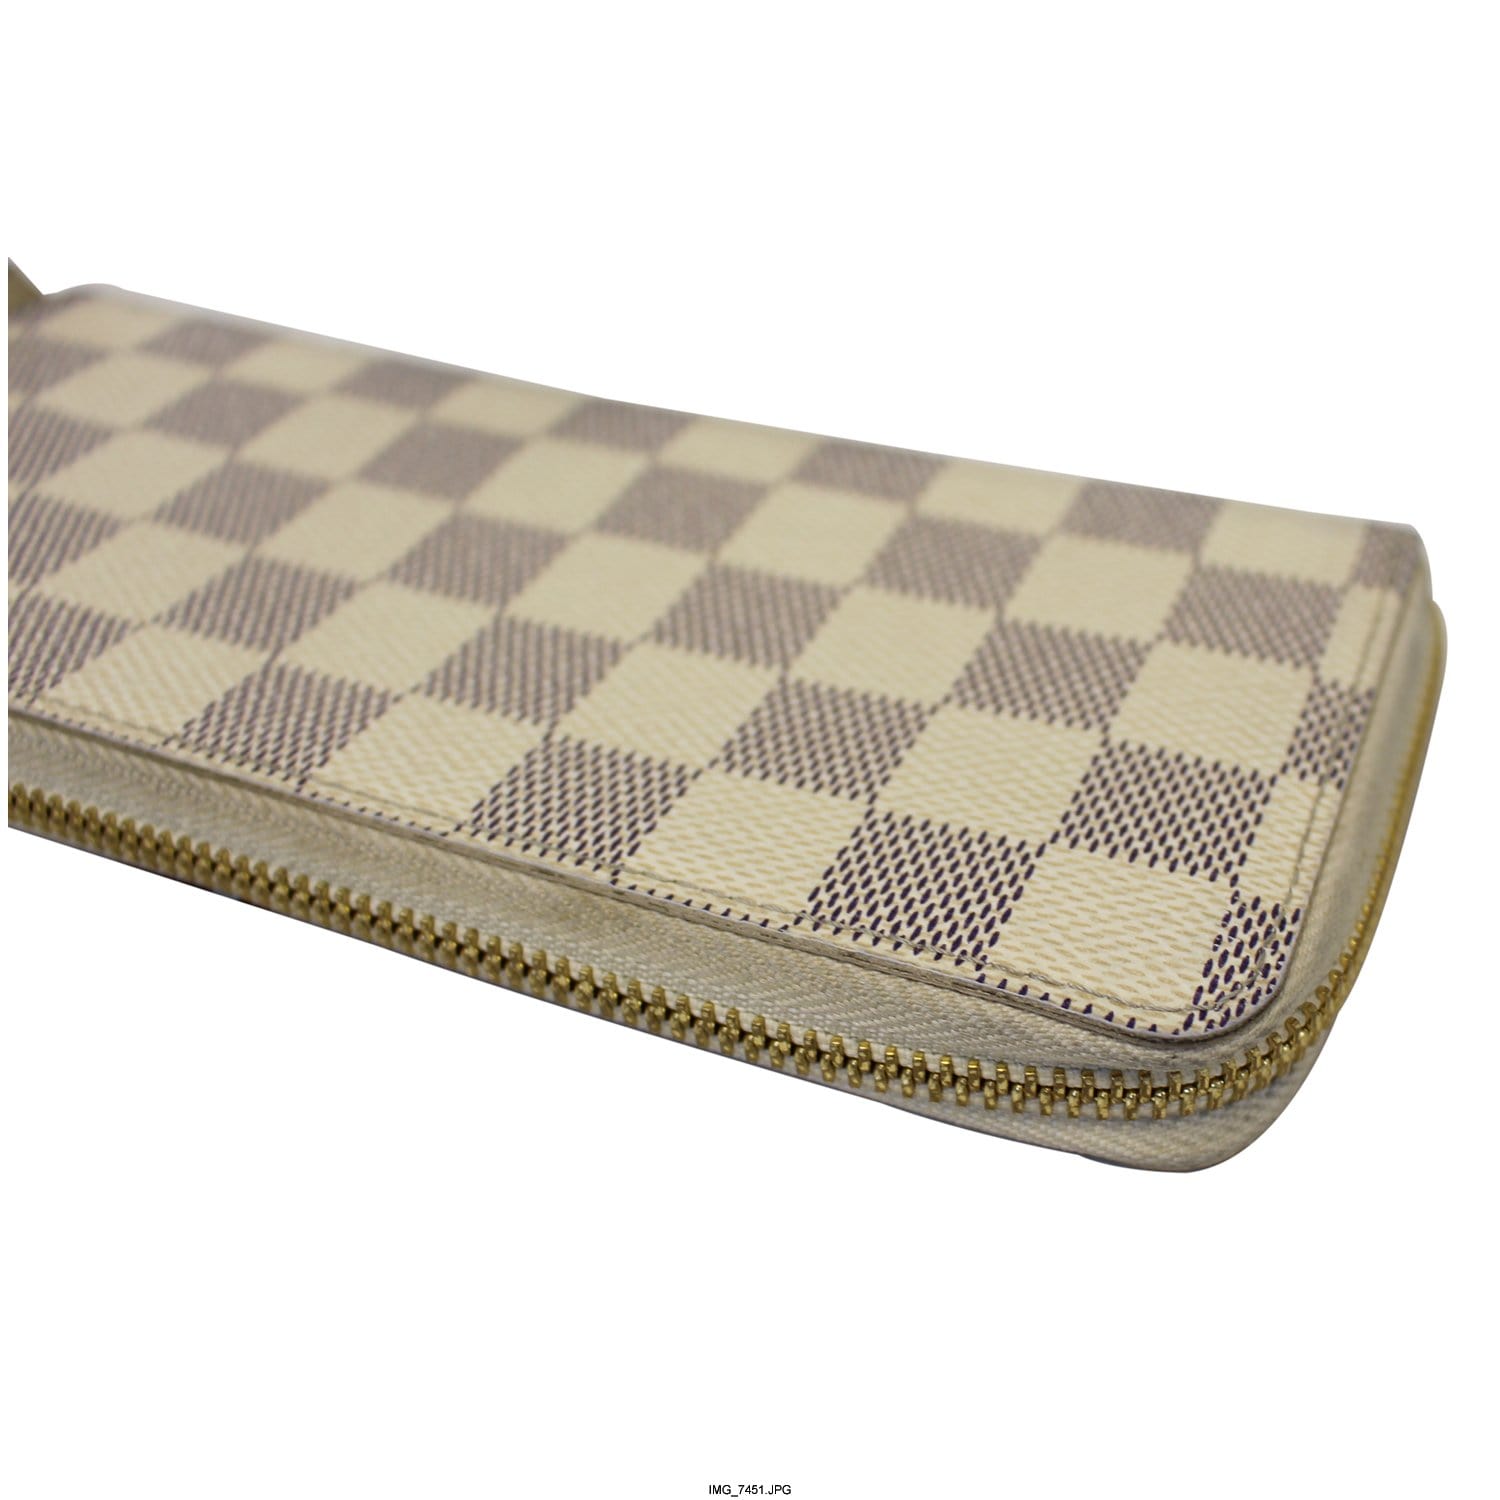 LOUIS VUITTON LOUIS VUITTON Portefeuille clemence Round purse N61264 Damier  Azur canvas Used N61264｜Product Code：2104102043809｜BRAND OFF Online Store